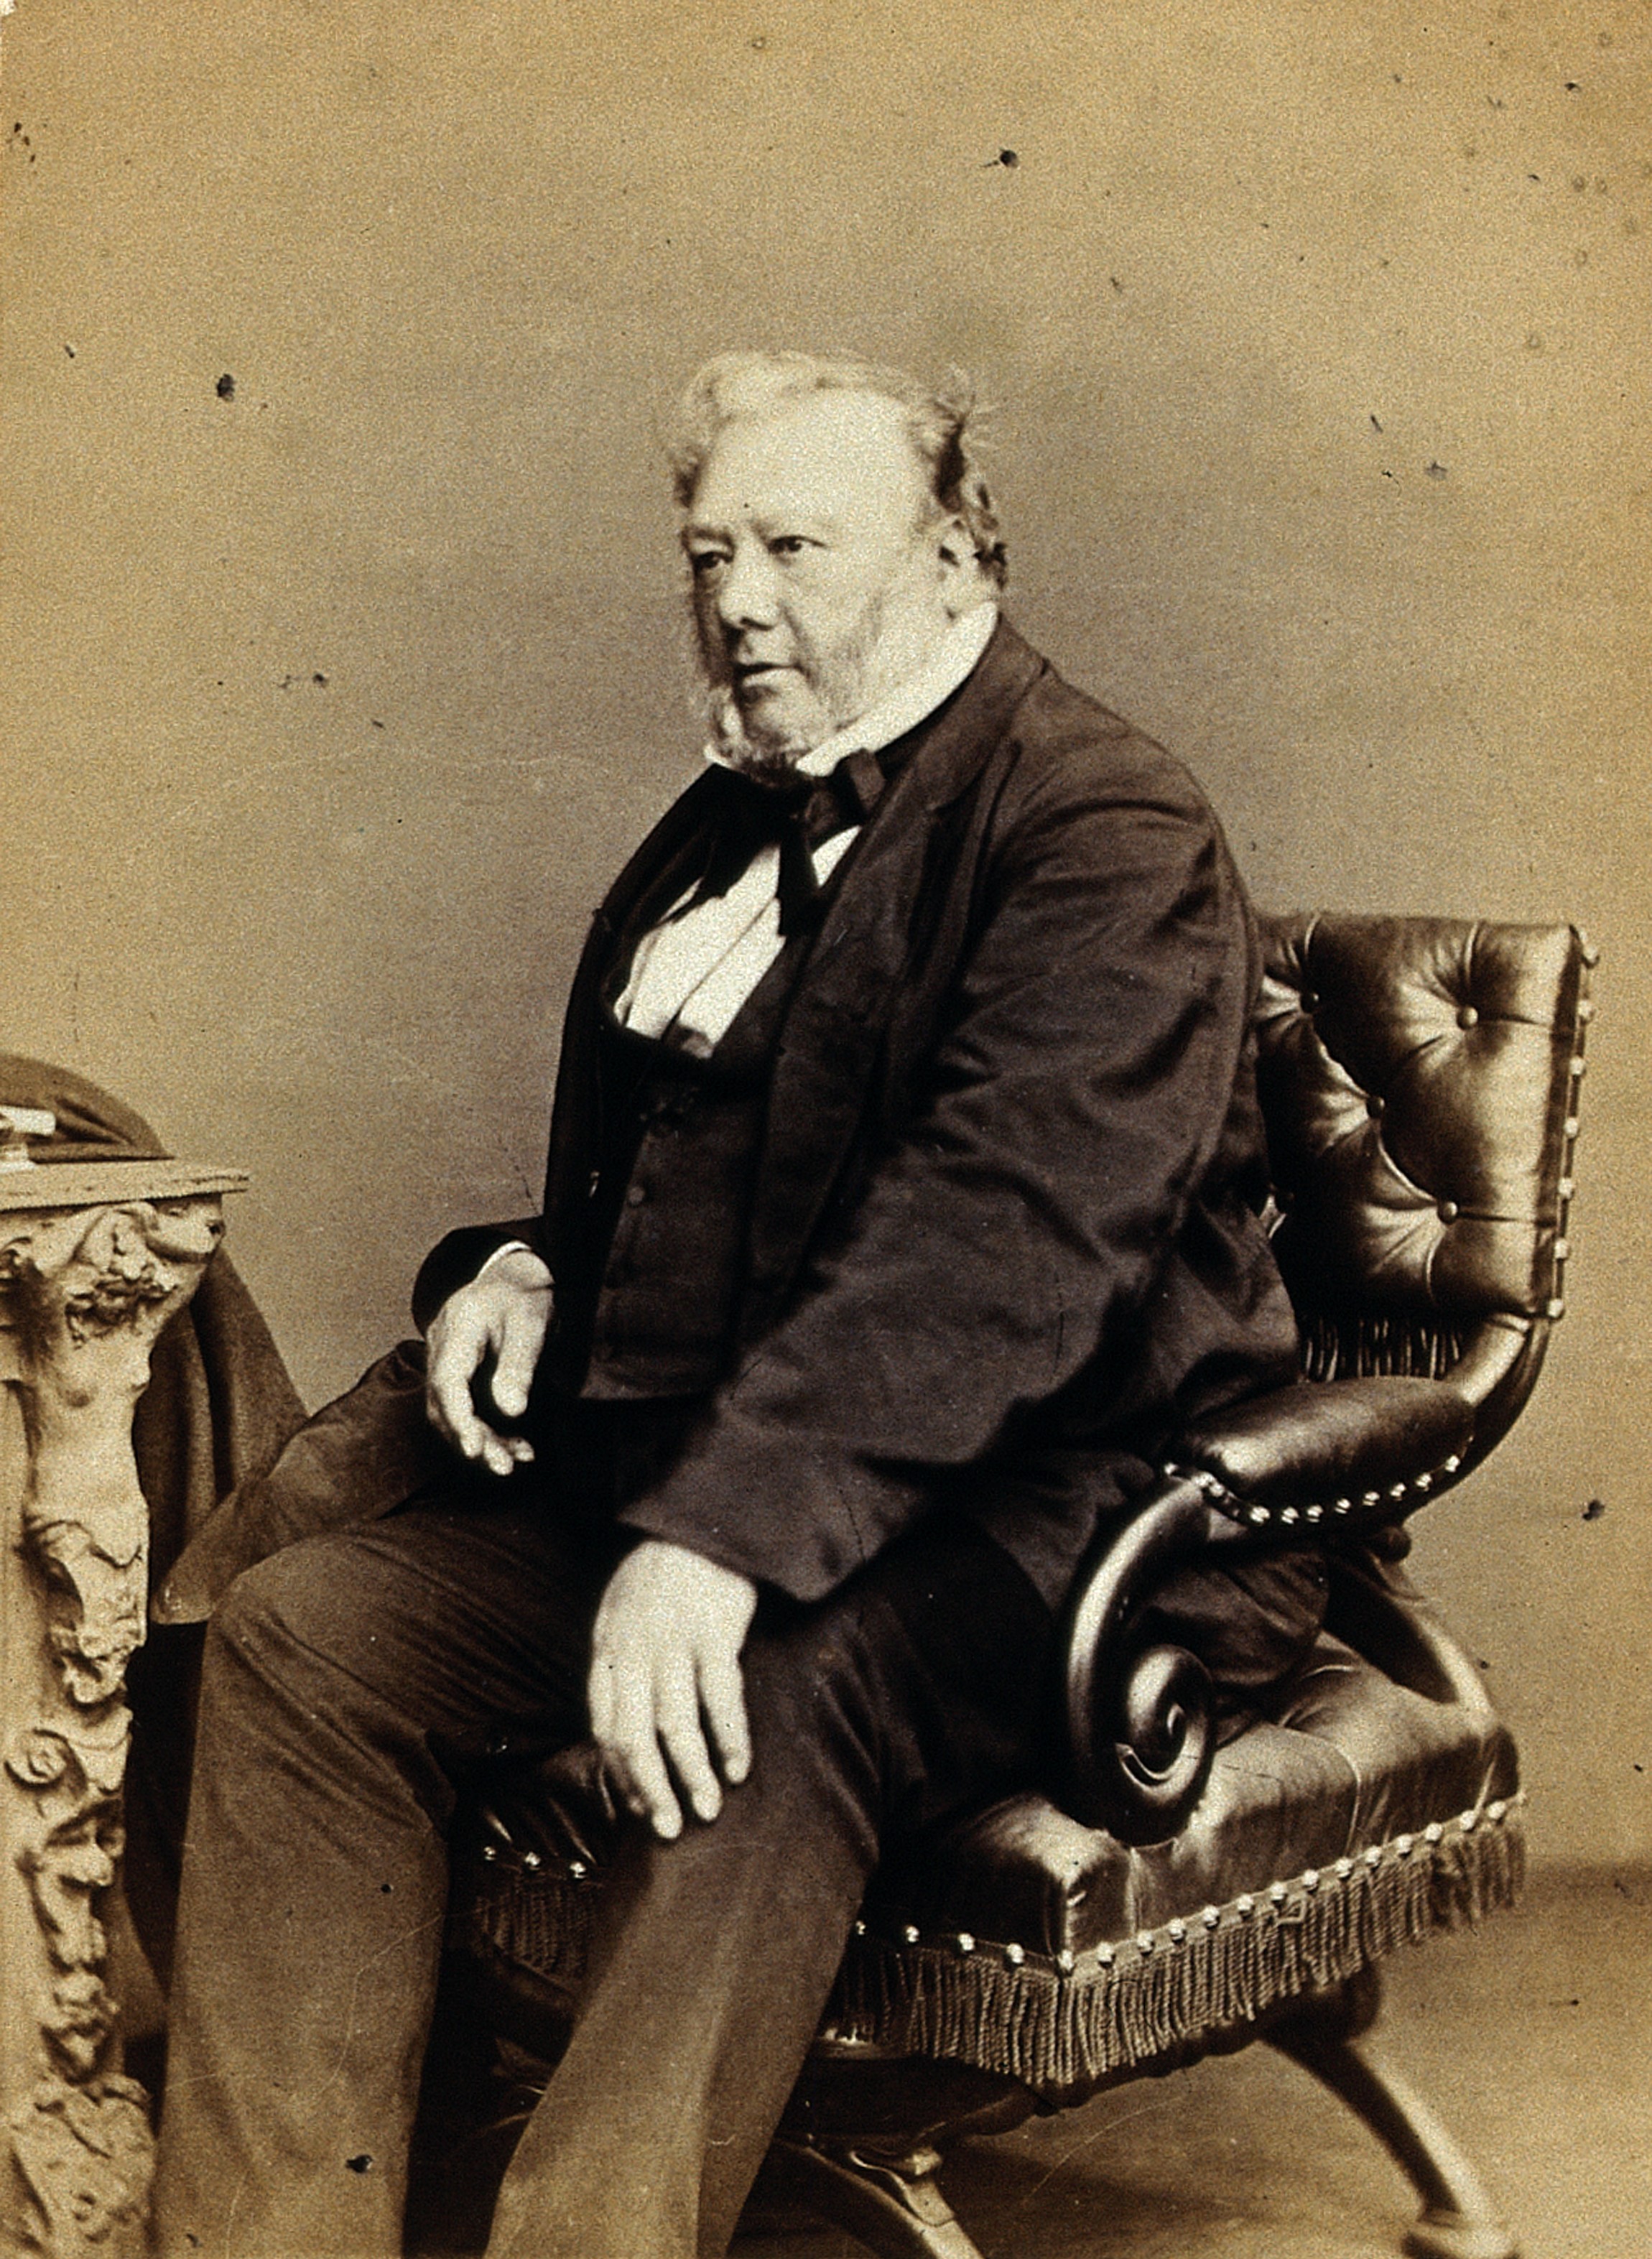 Francis Henry Ramsbottom. Photograph by Ernest Edwards, 1868 Wellcome V0028430